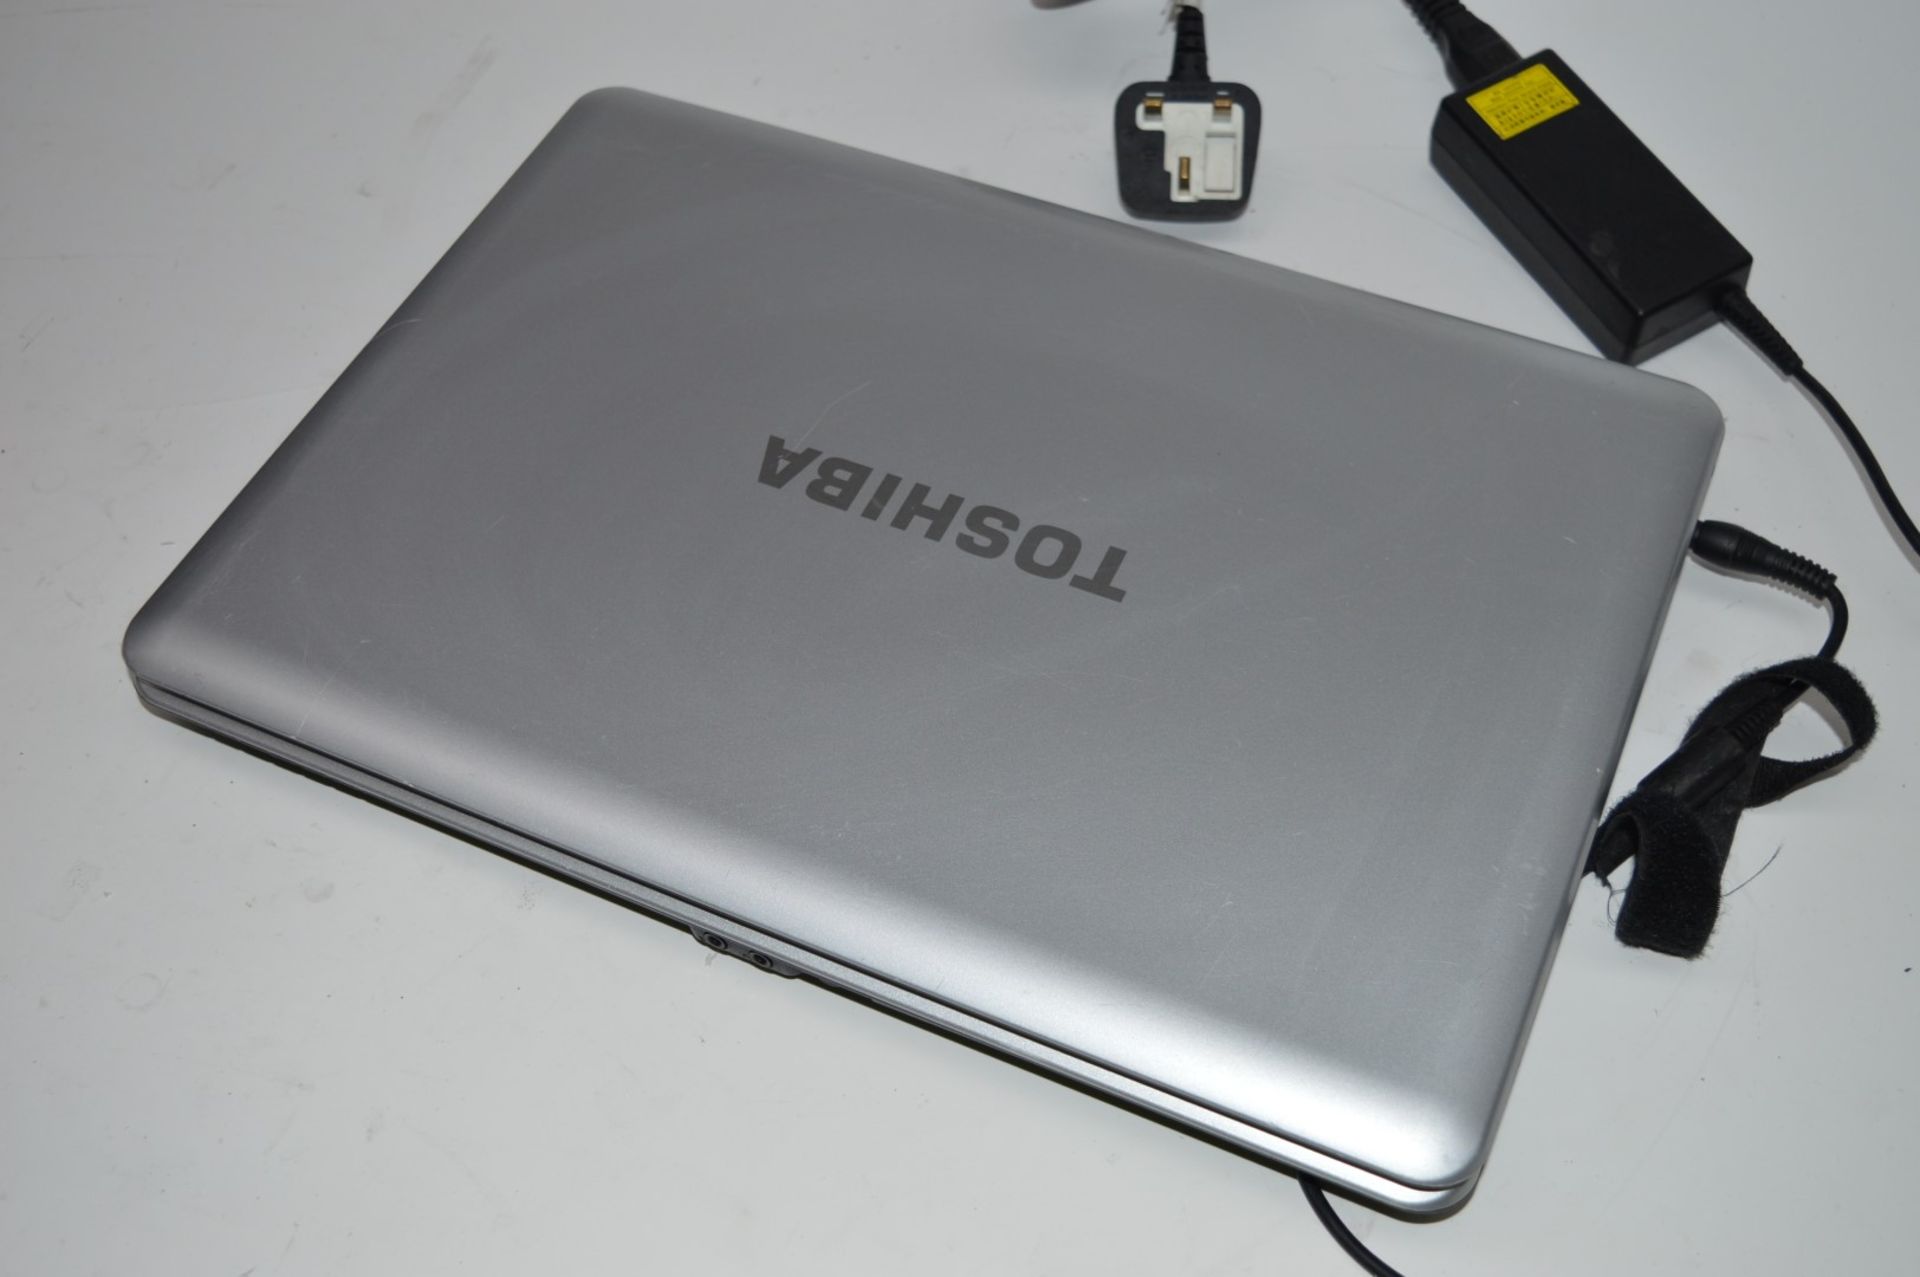 1 x Toshiba 15.4 Inch Laptop Computer - Intel Core 2 Duo T6570 Processor and 2gb Ram - Tested to - Image 5 of 7